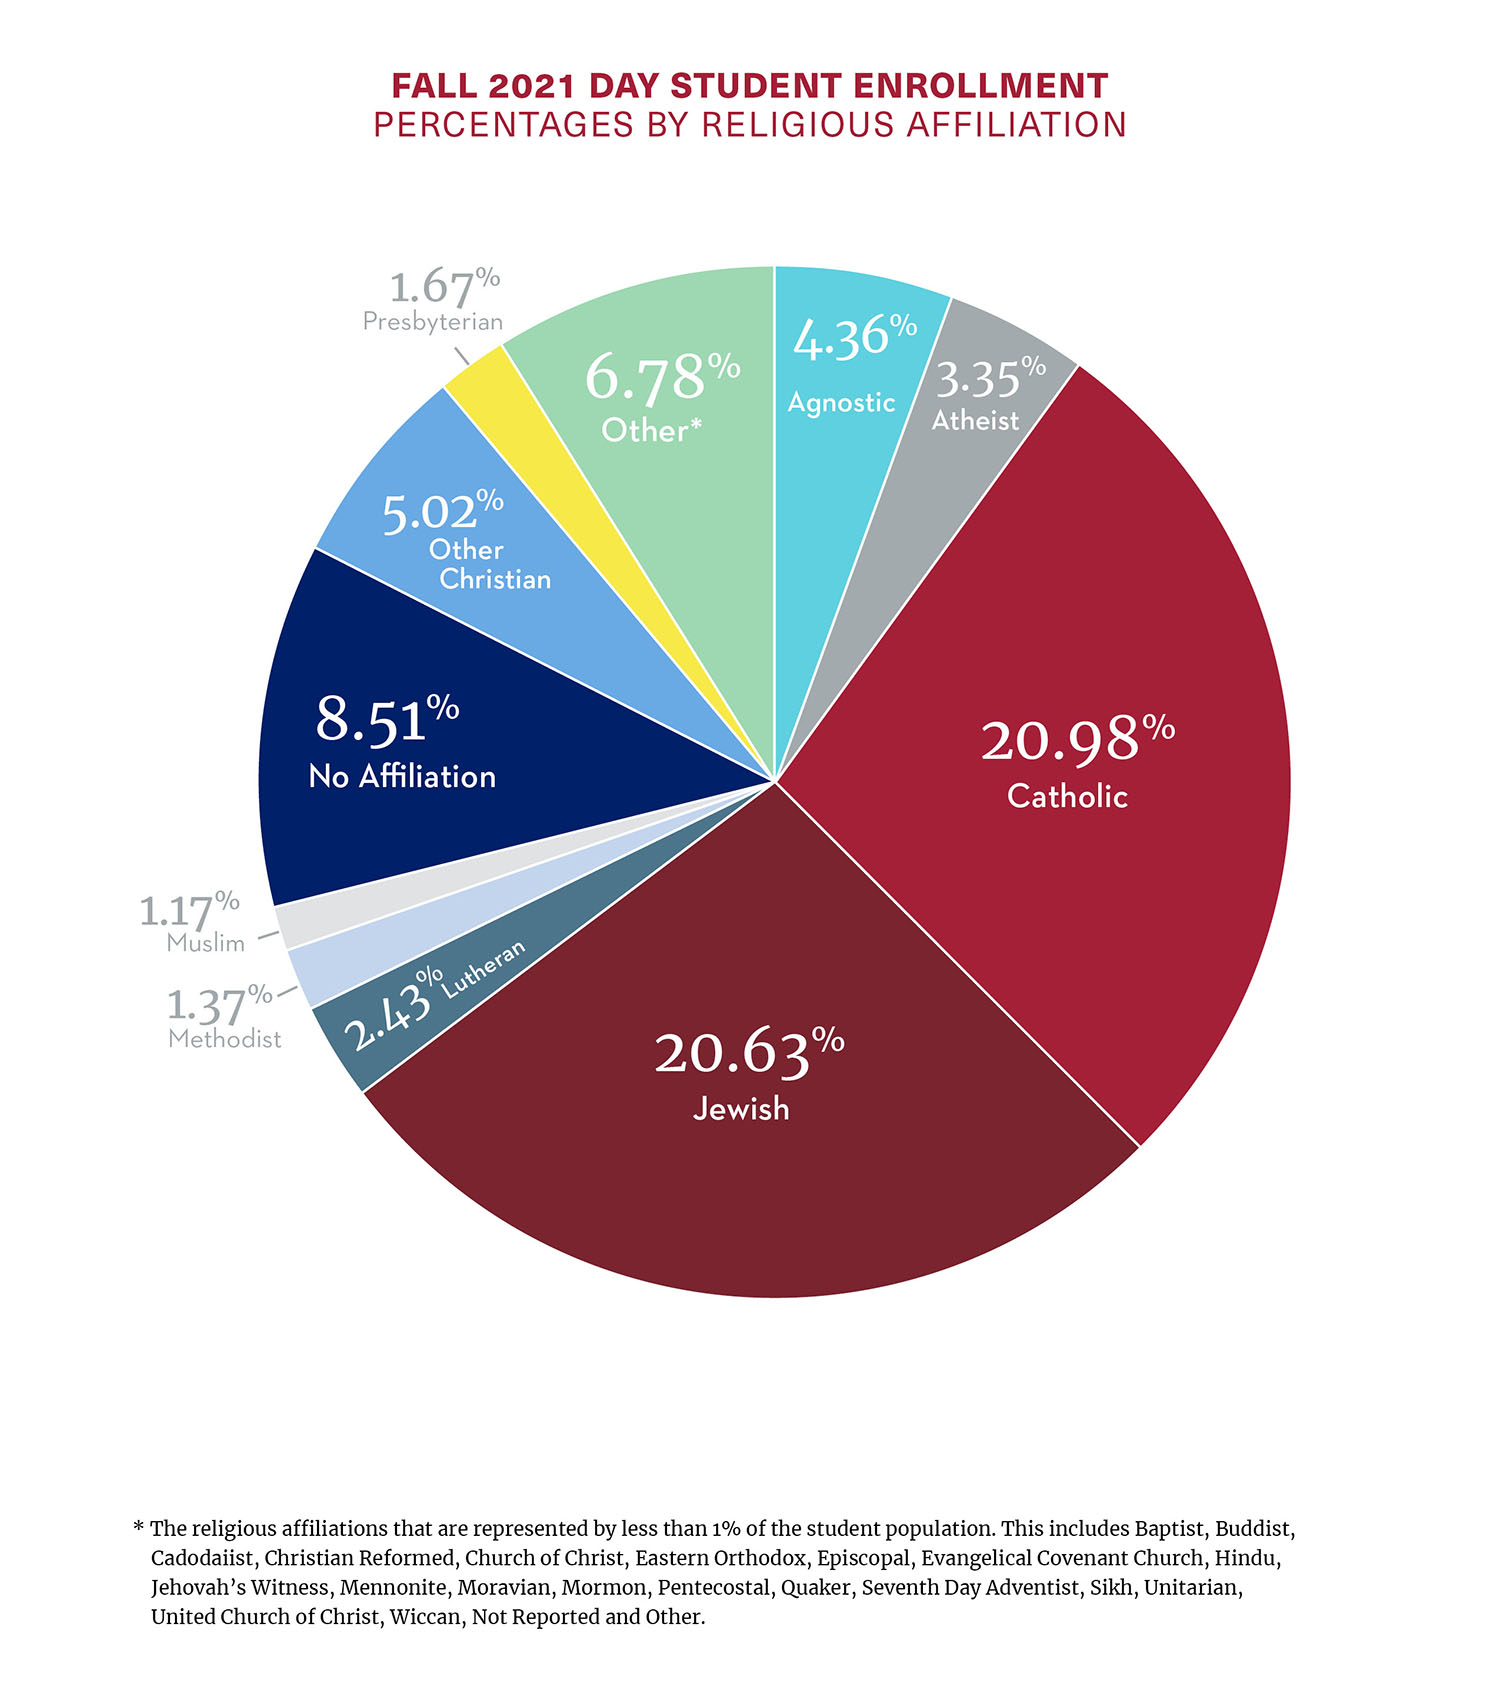 Fall 2021 day student enrollment, percentages by religious affiliation.